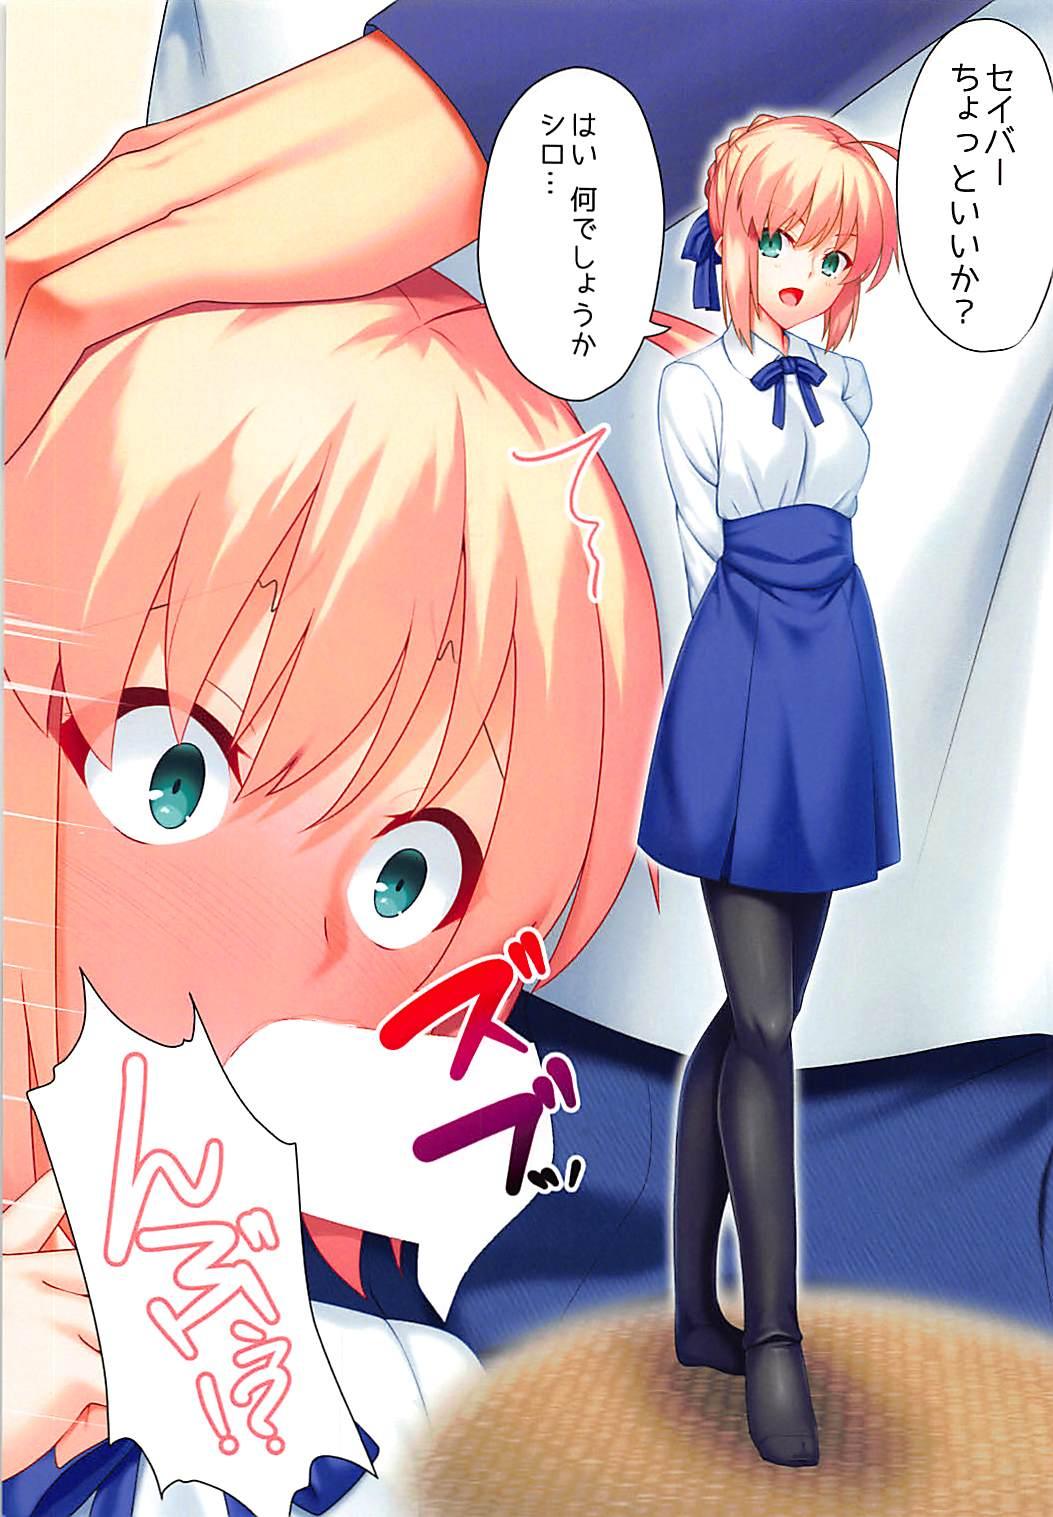 Rub HaraiSaber Hon - Fate grand order Fate stay night Juicy - Page 2